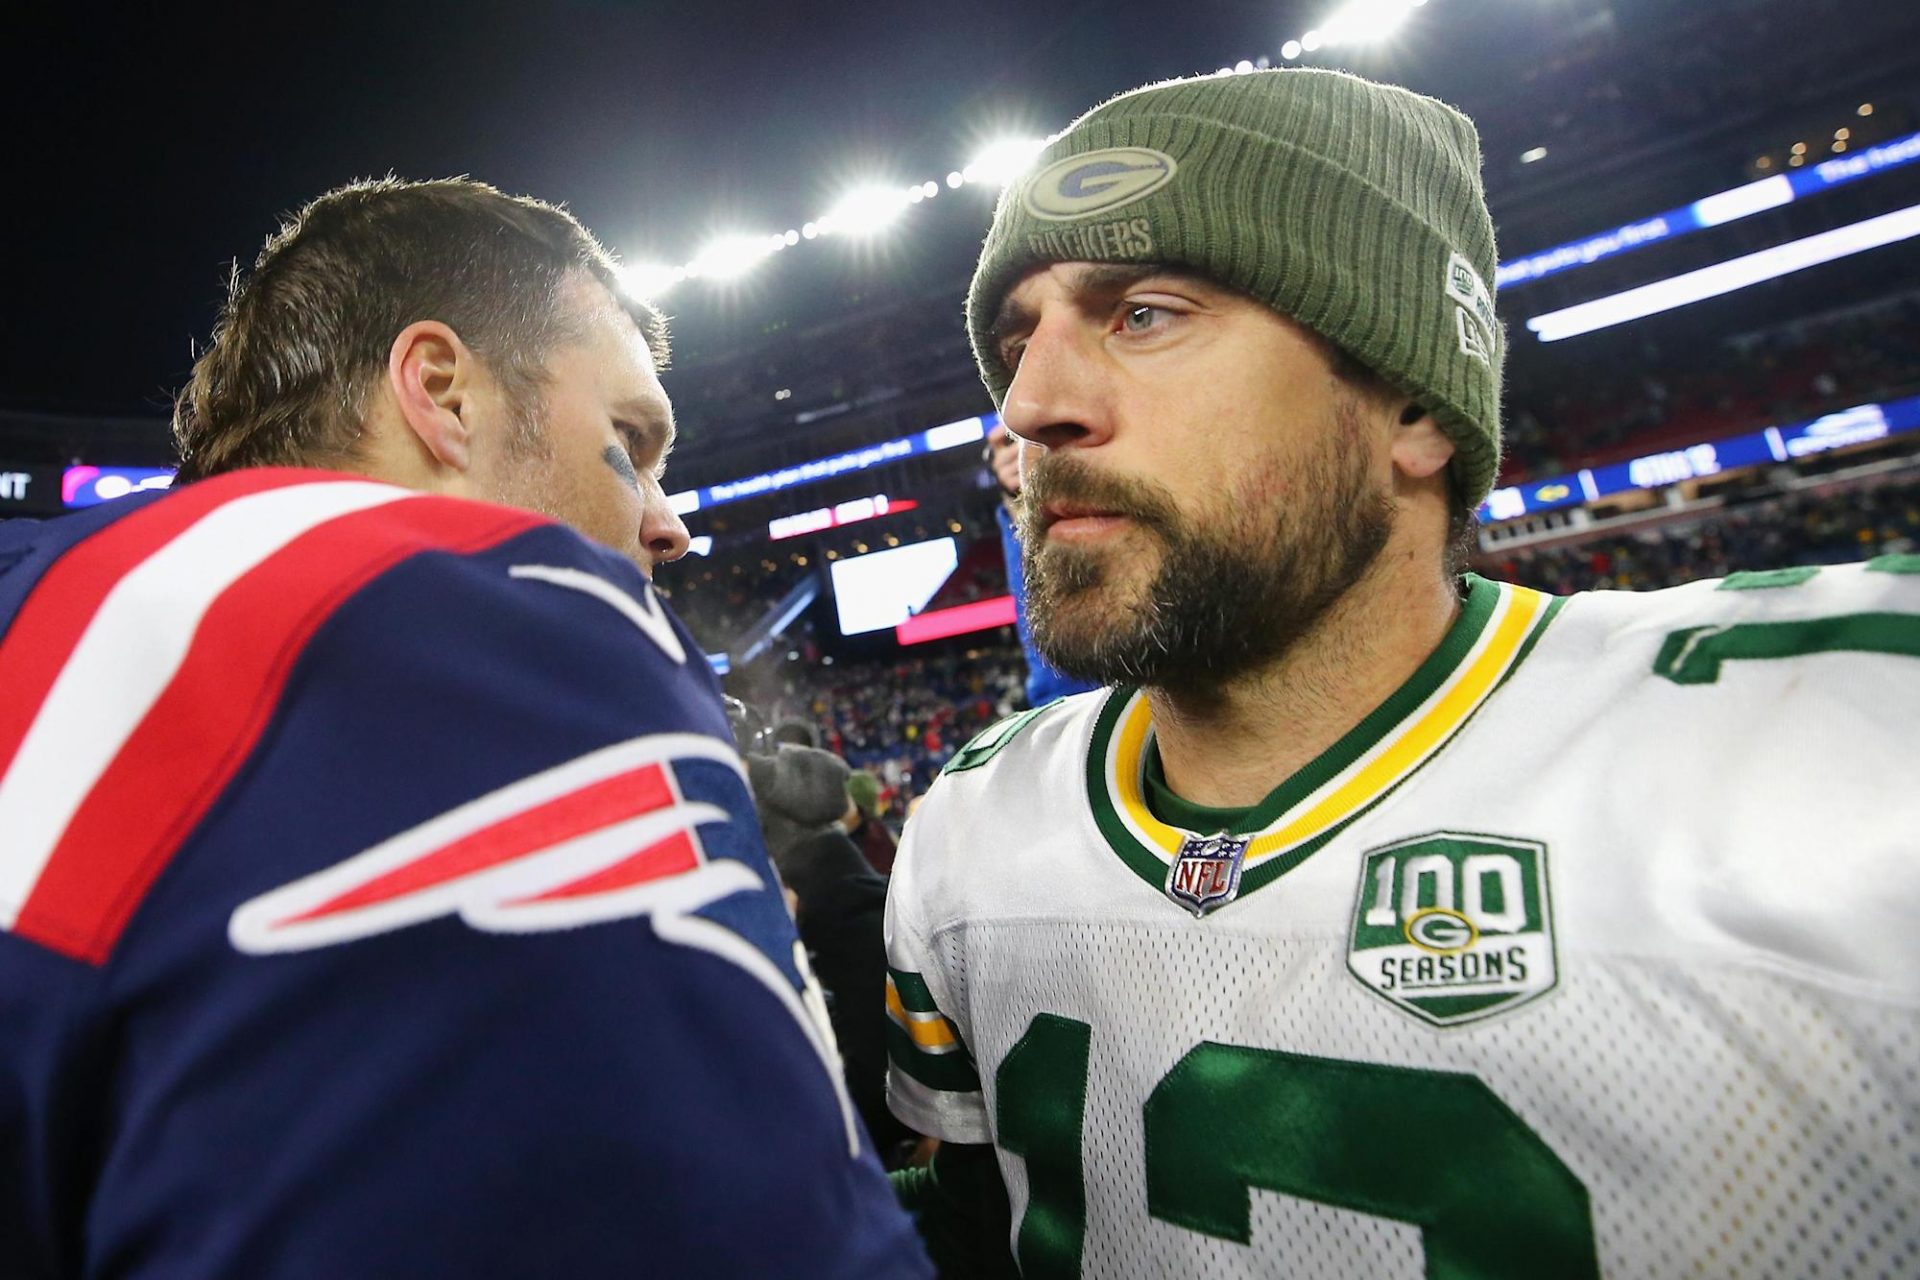 Tom Brady hilariously trolls Packers QB Aaron Rodgers in dialog